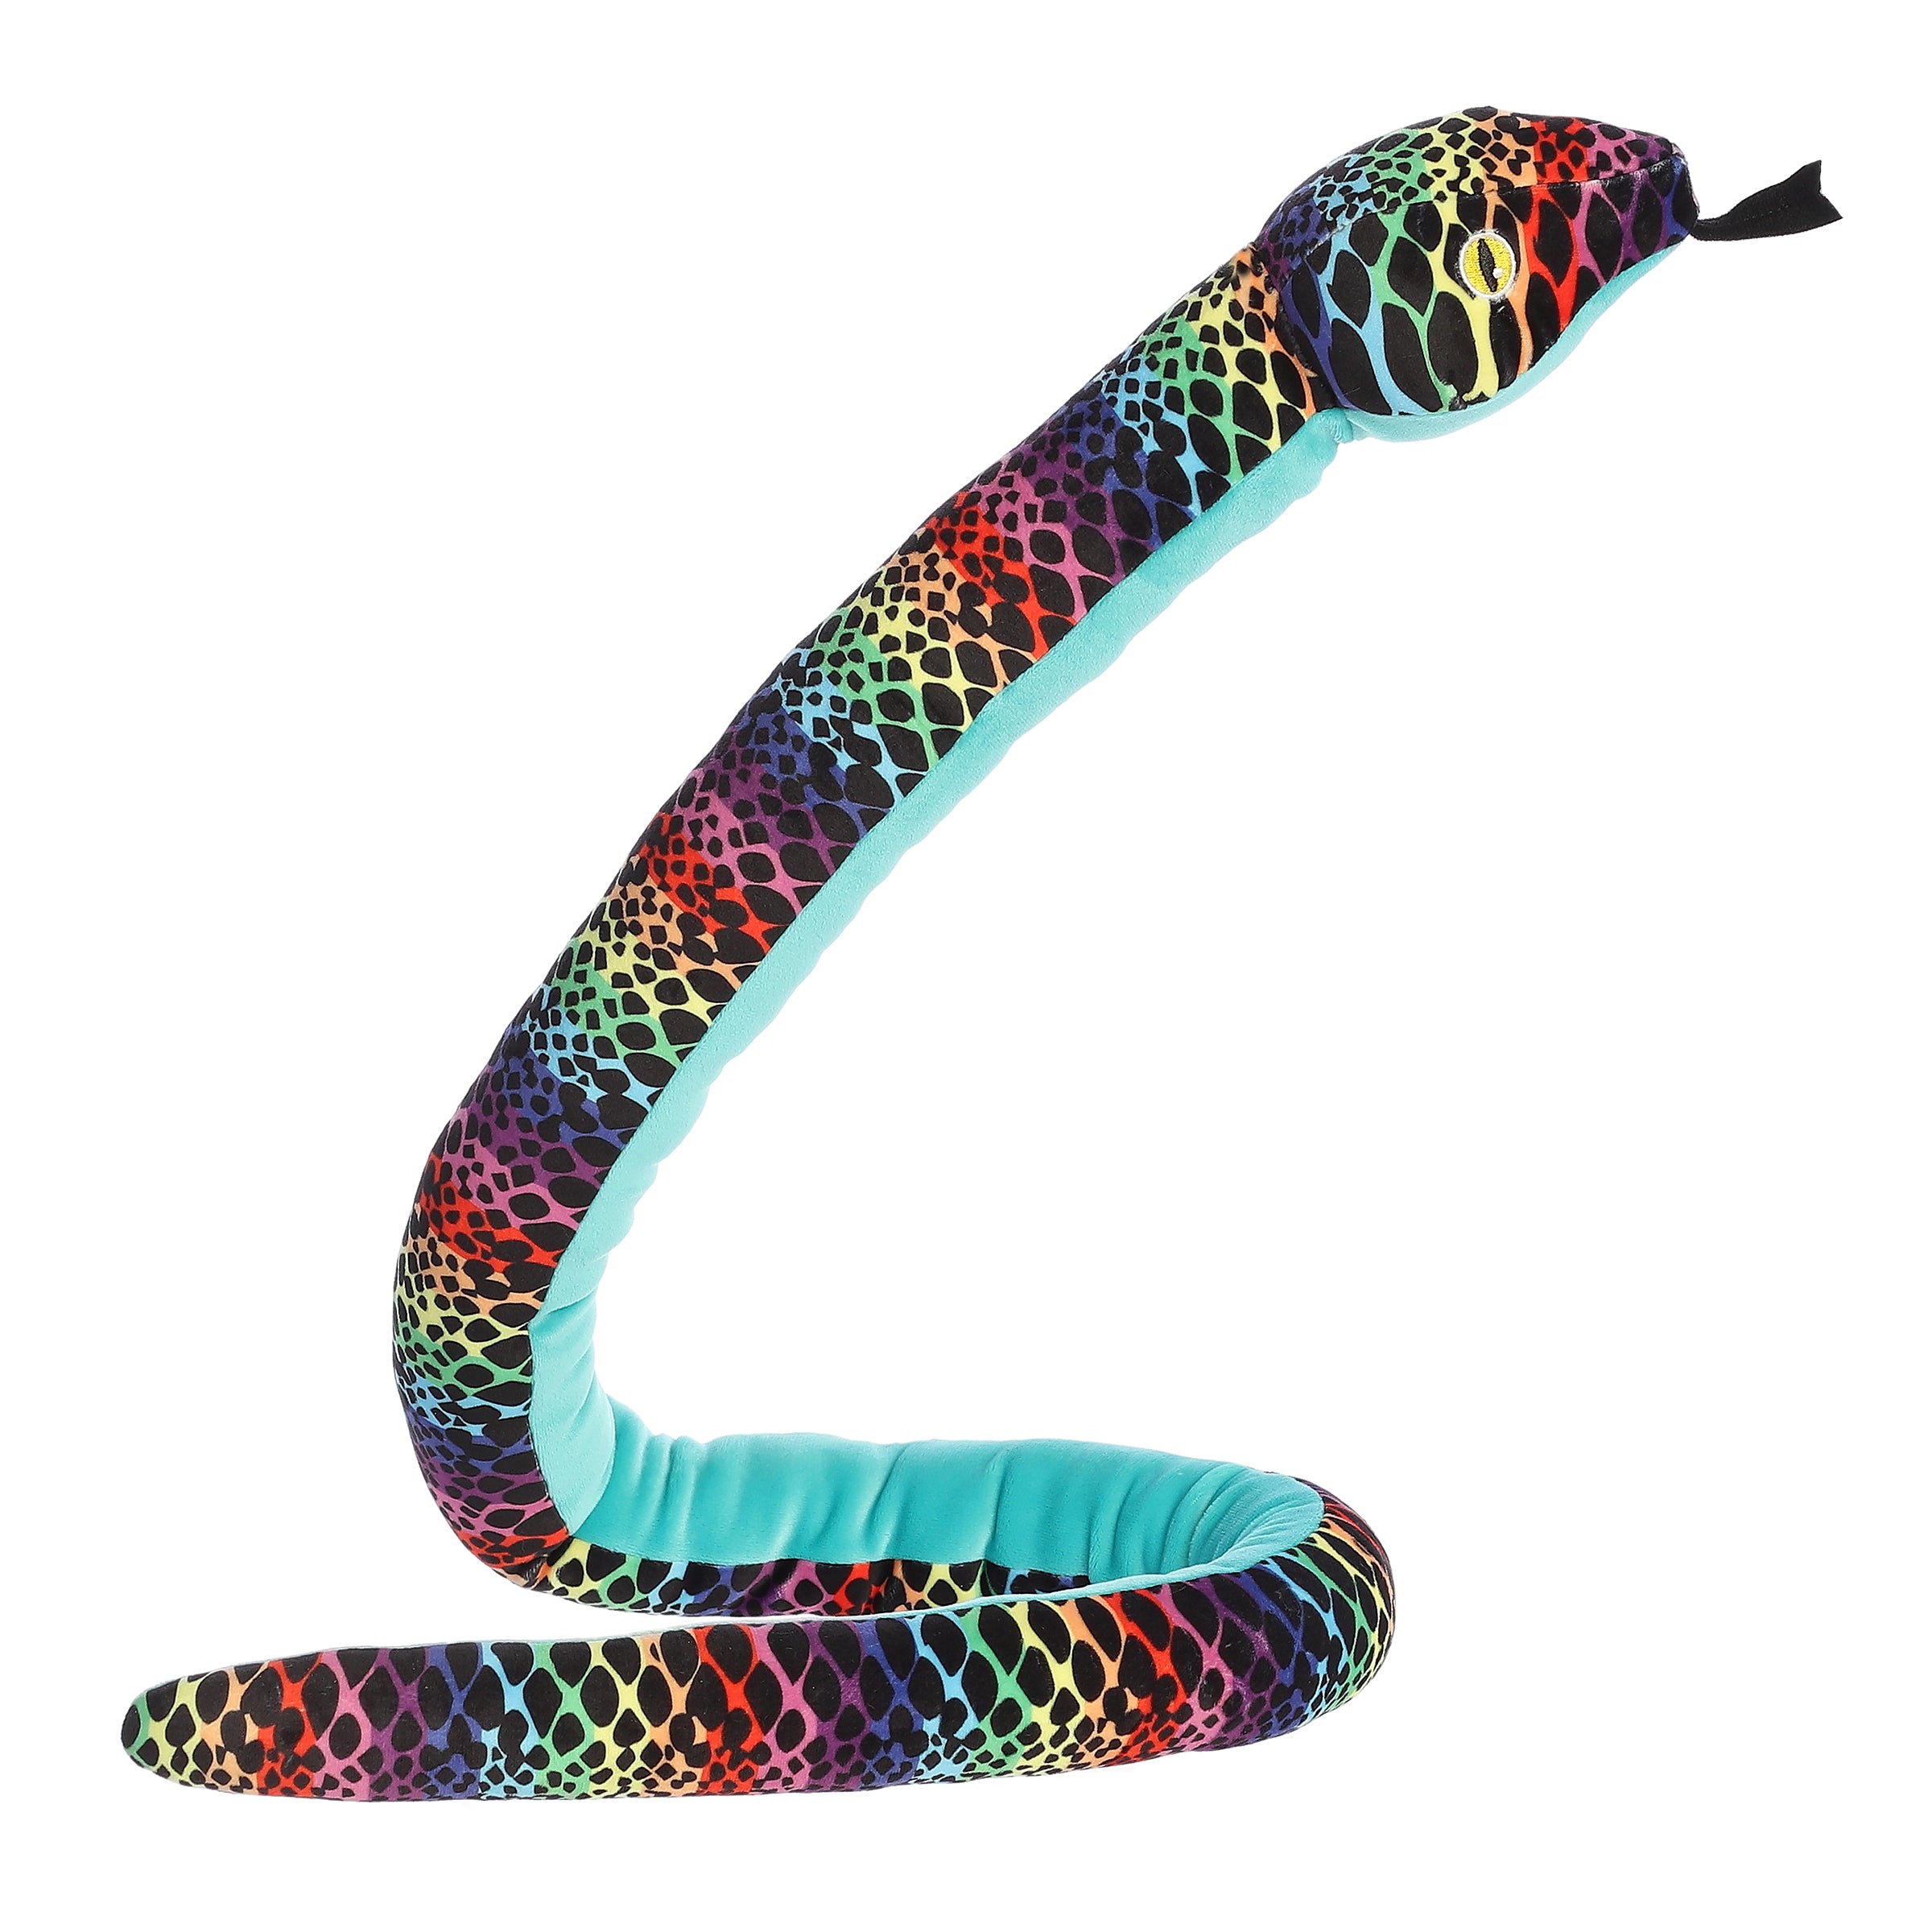 A long rainbow snake stuffed animal plush that has a bright blue underbelly and rainbow scales.